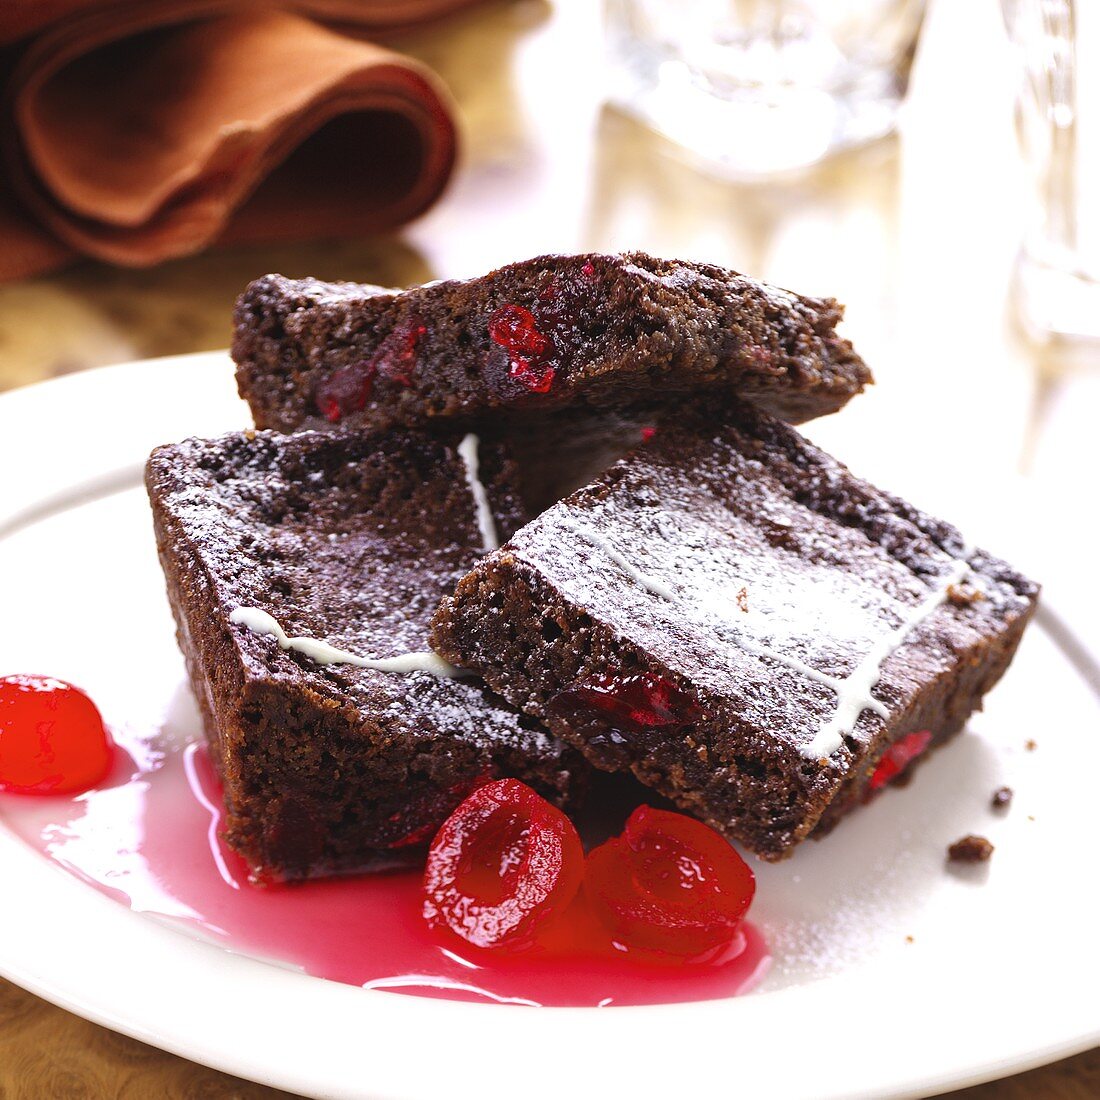 Three pieces of chocolate cake with glace cherries